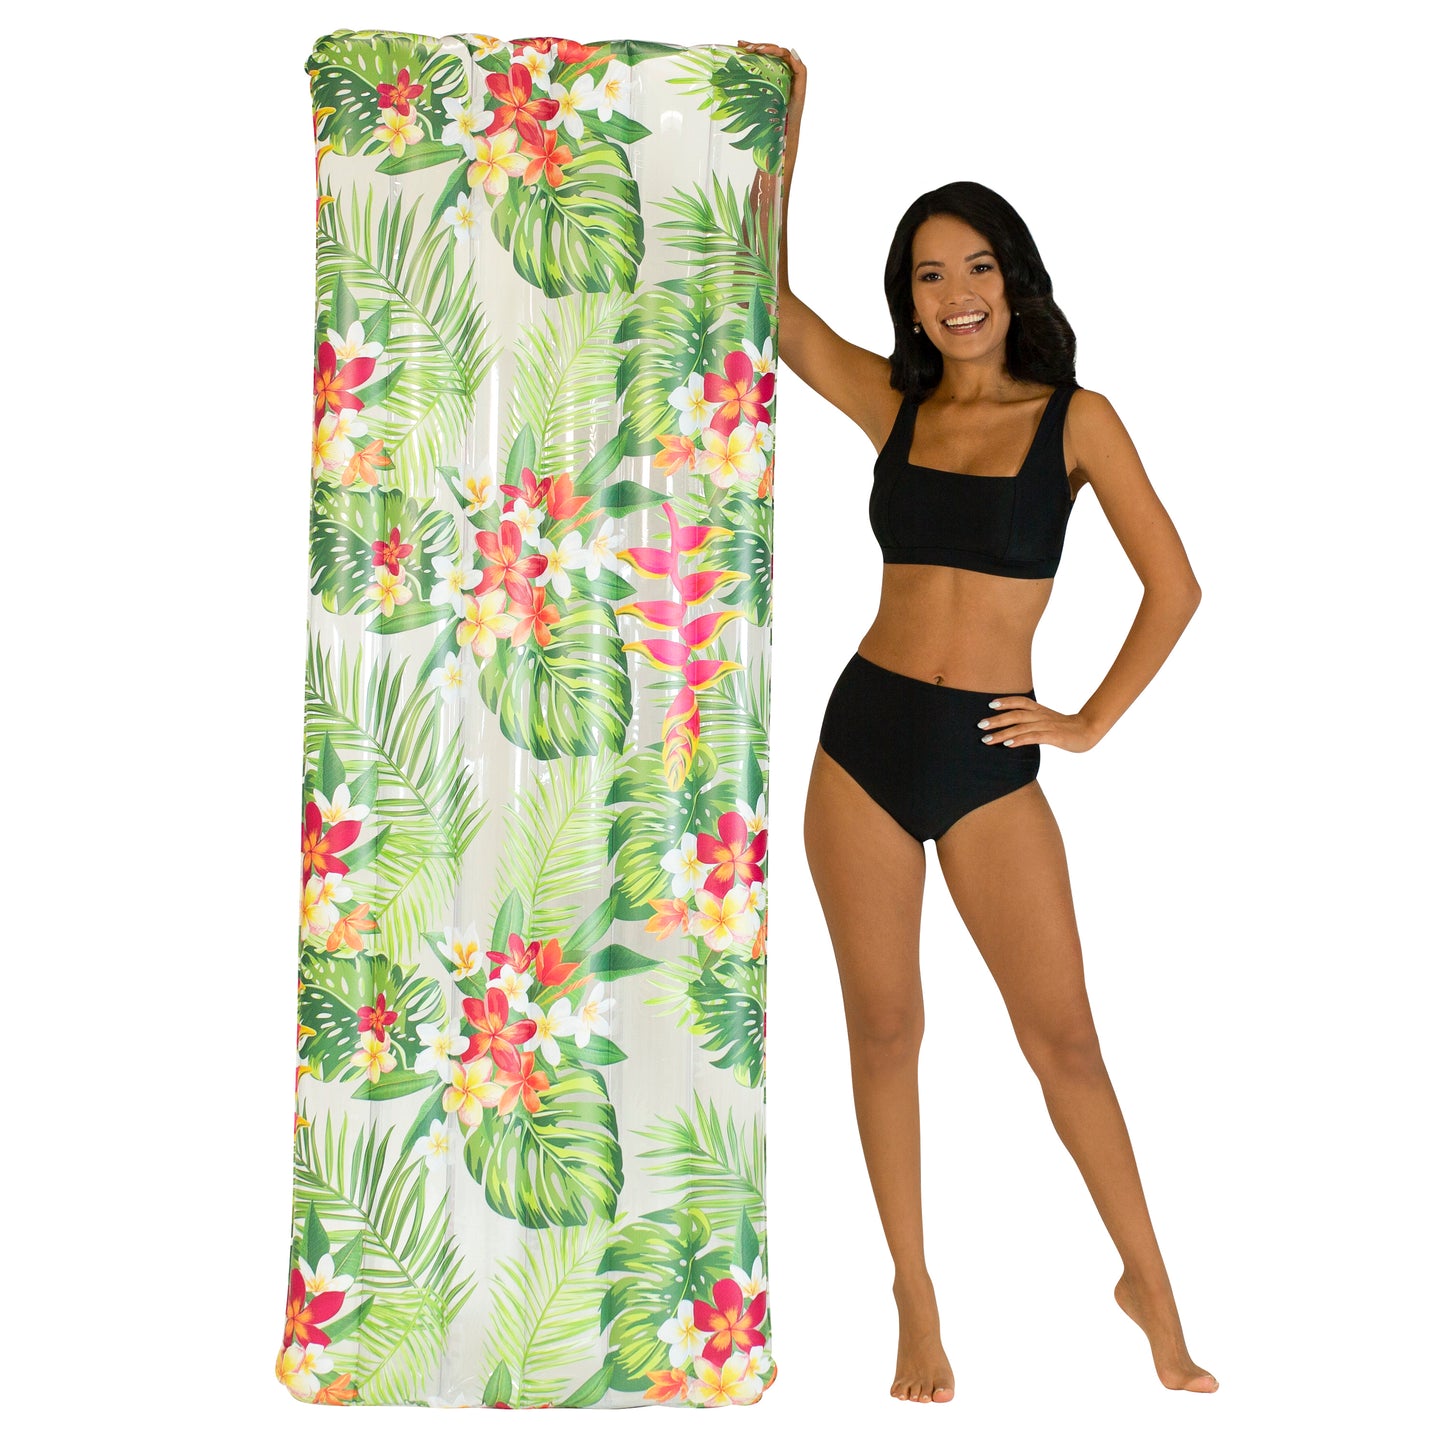 Deluxe Pool Raft 74" x 30  with Tropical Flower Print